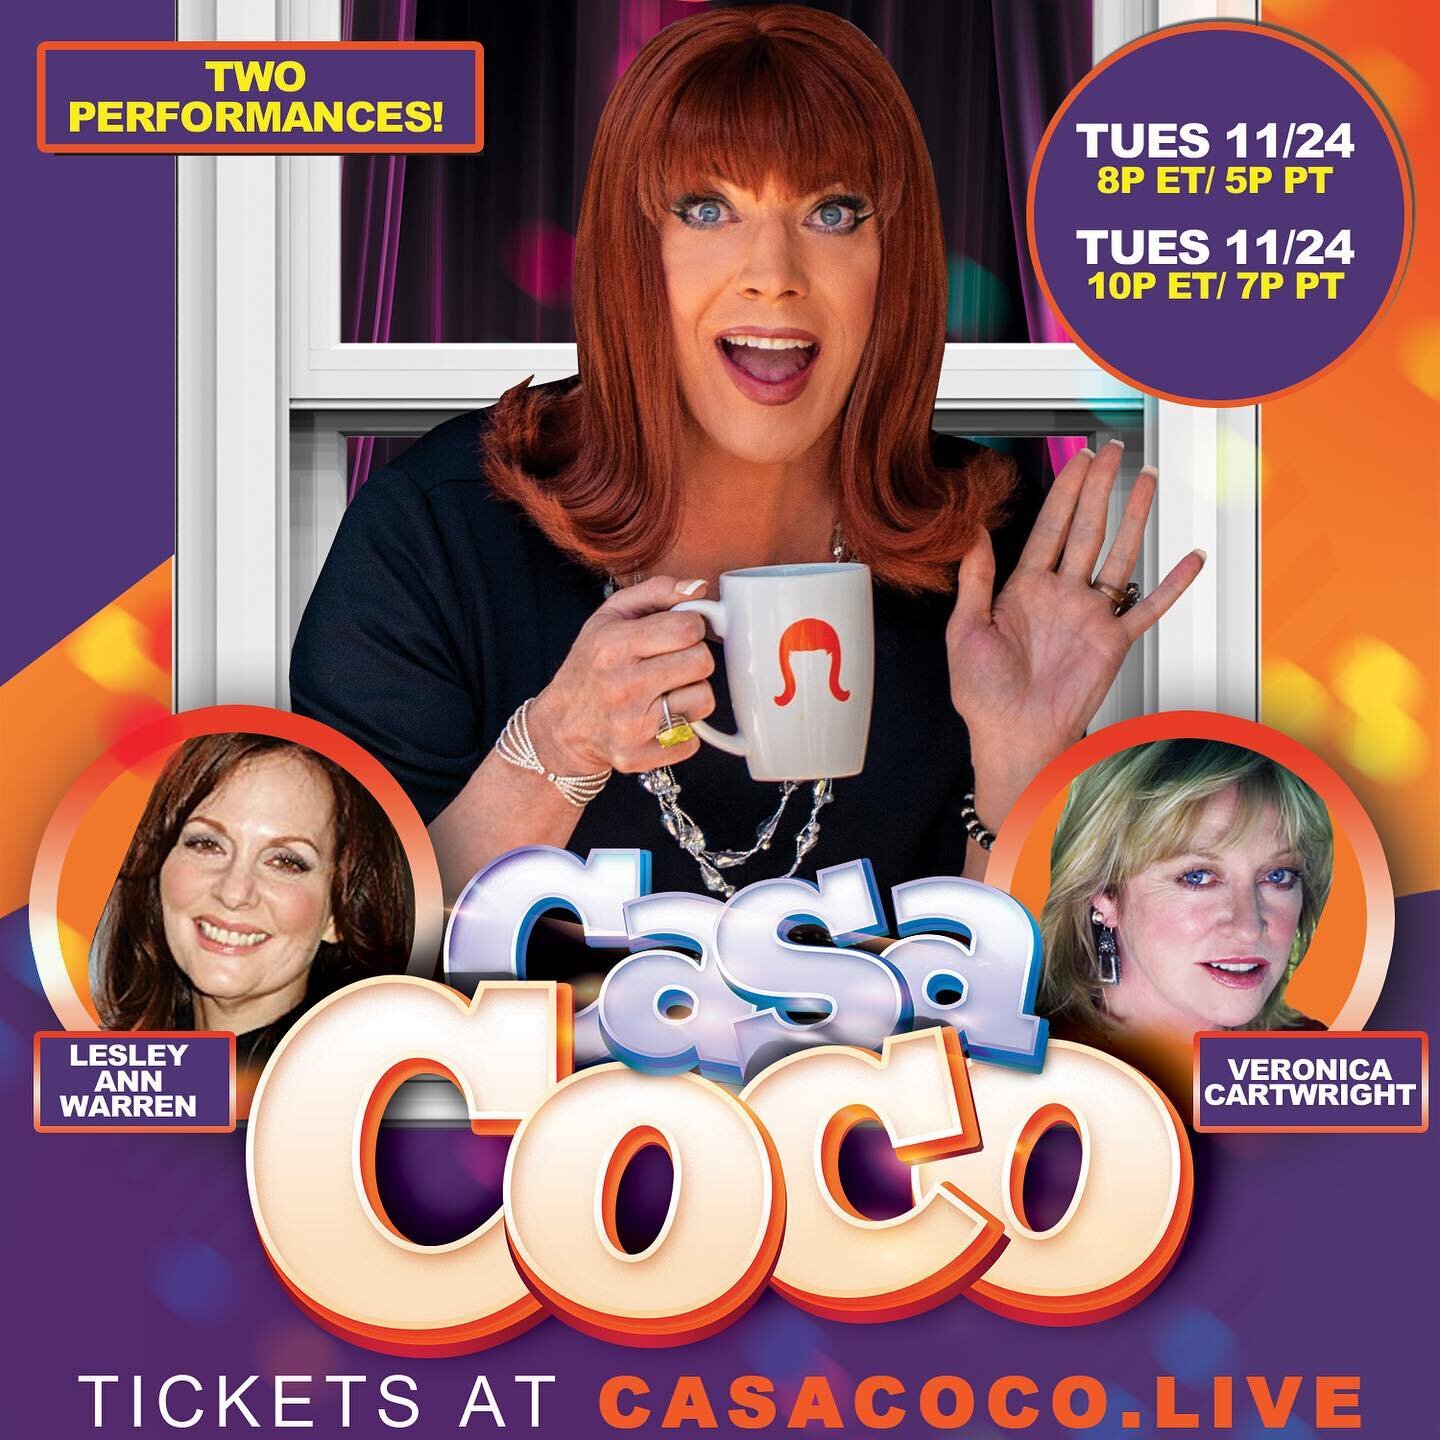 Don&rsquo;t miss the next Casa Coco on Nov 24th! Pay what you can tickets CasaCoco.live